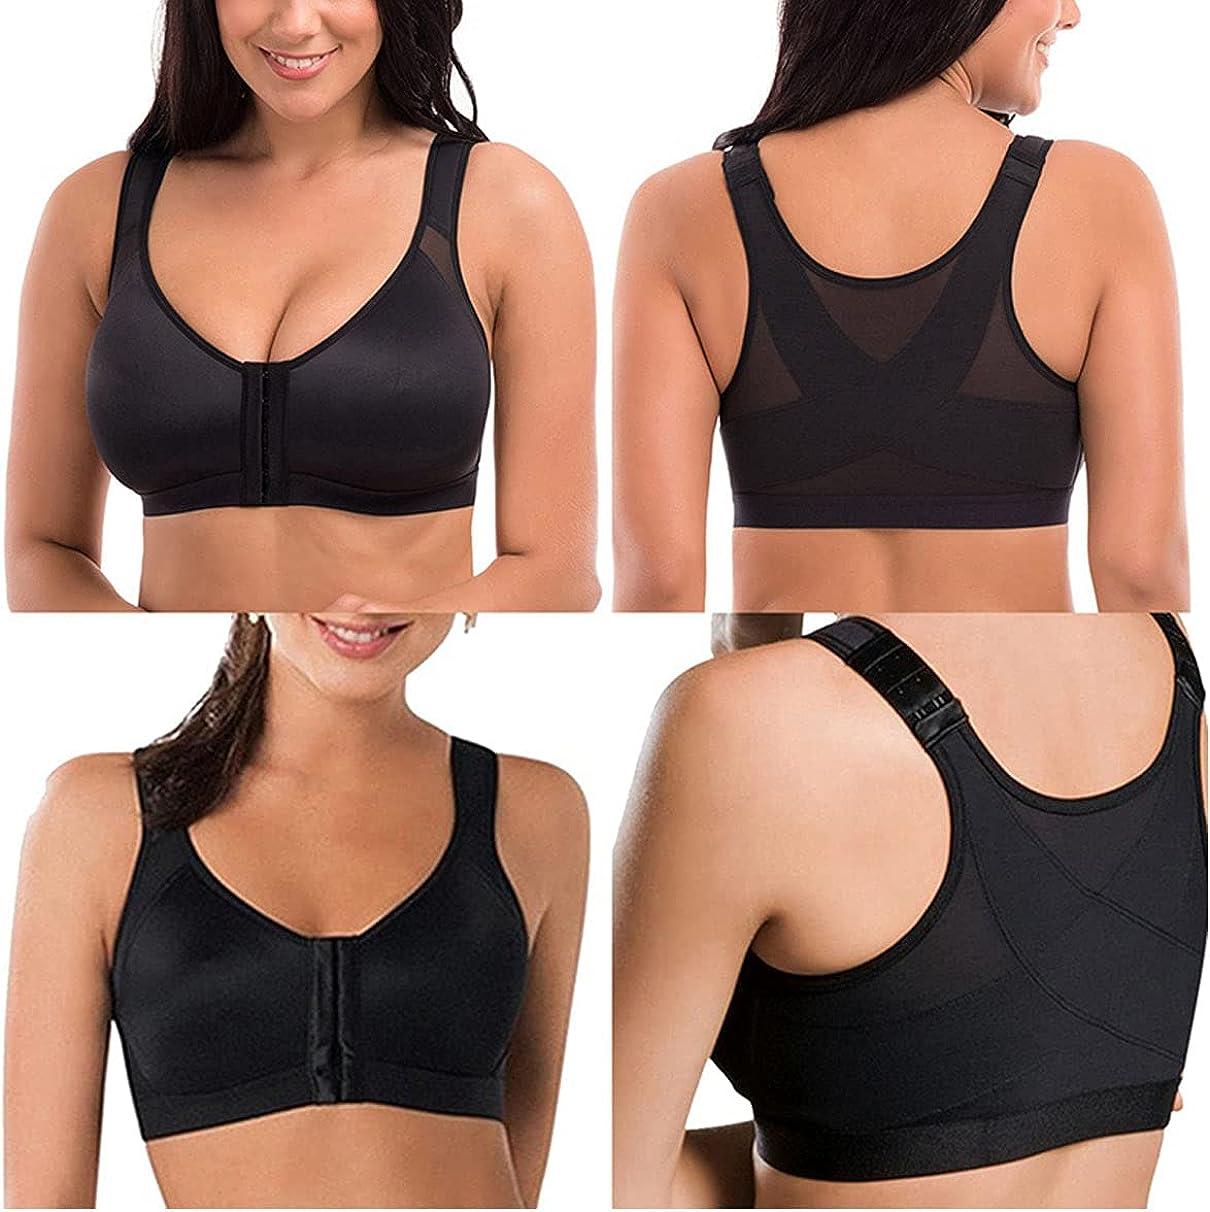 Adjustable straps Bras with 10% discount!